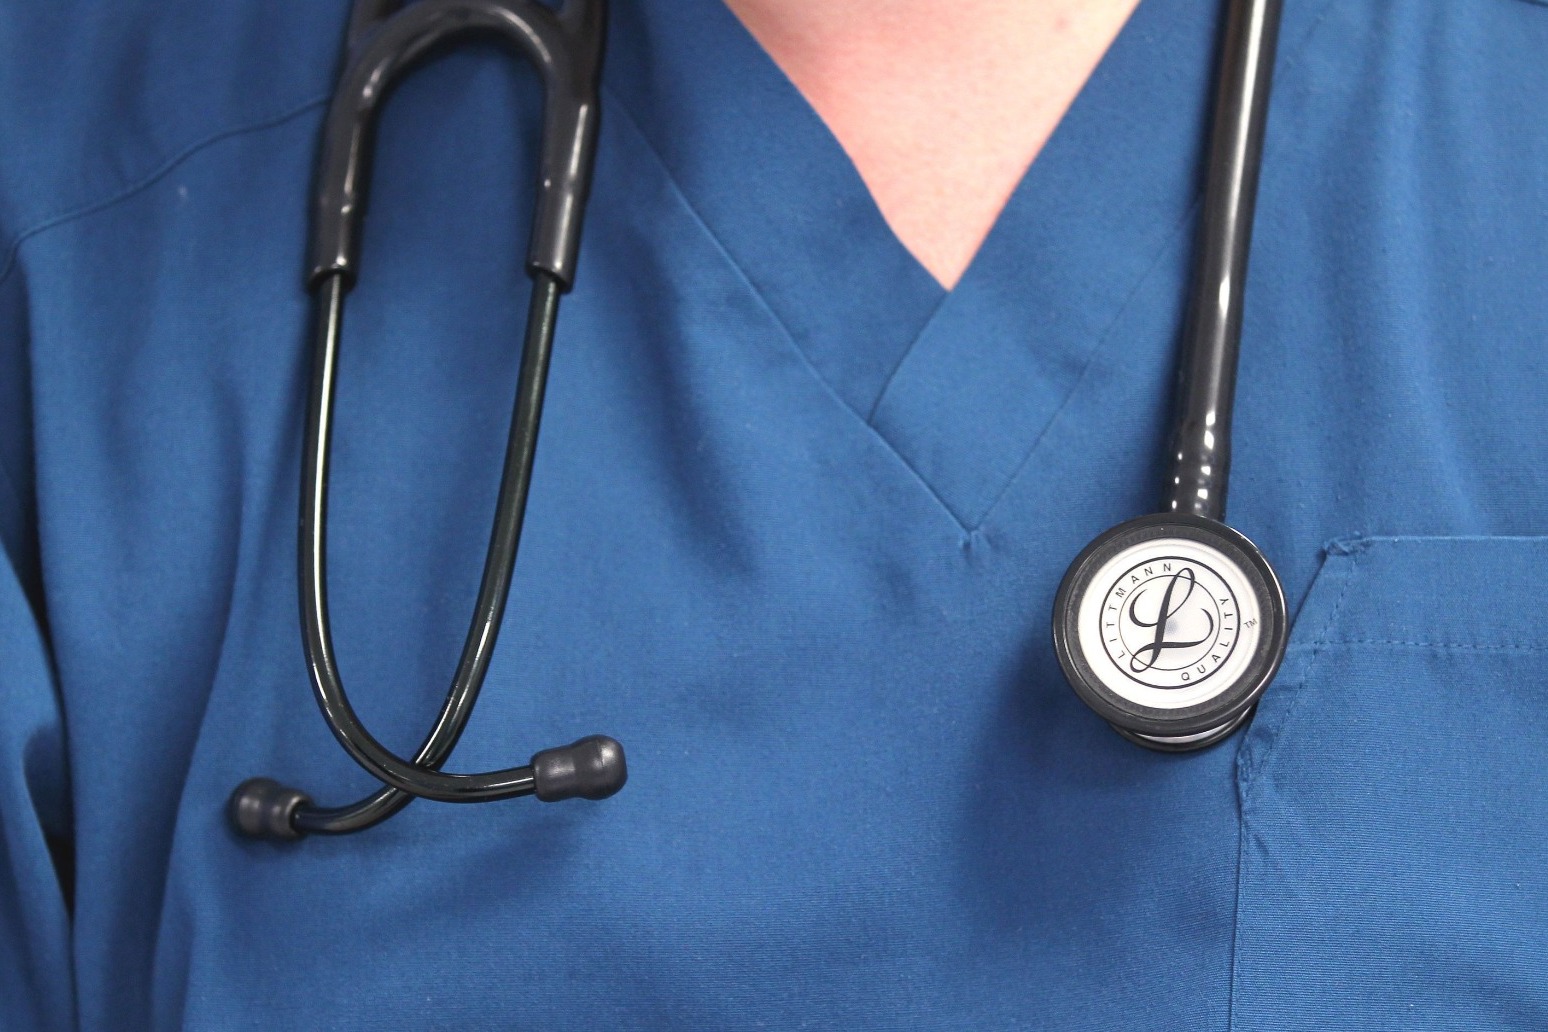 DOCTORS WARN MPS NOT TO POLITICISE THE NHS 